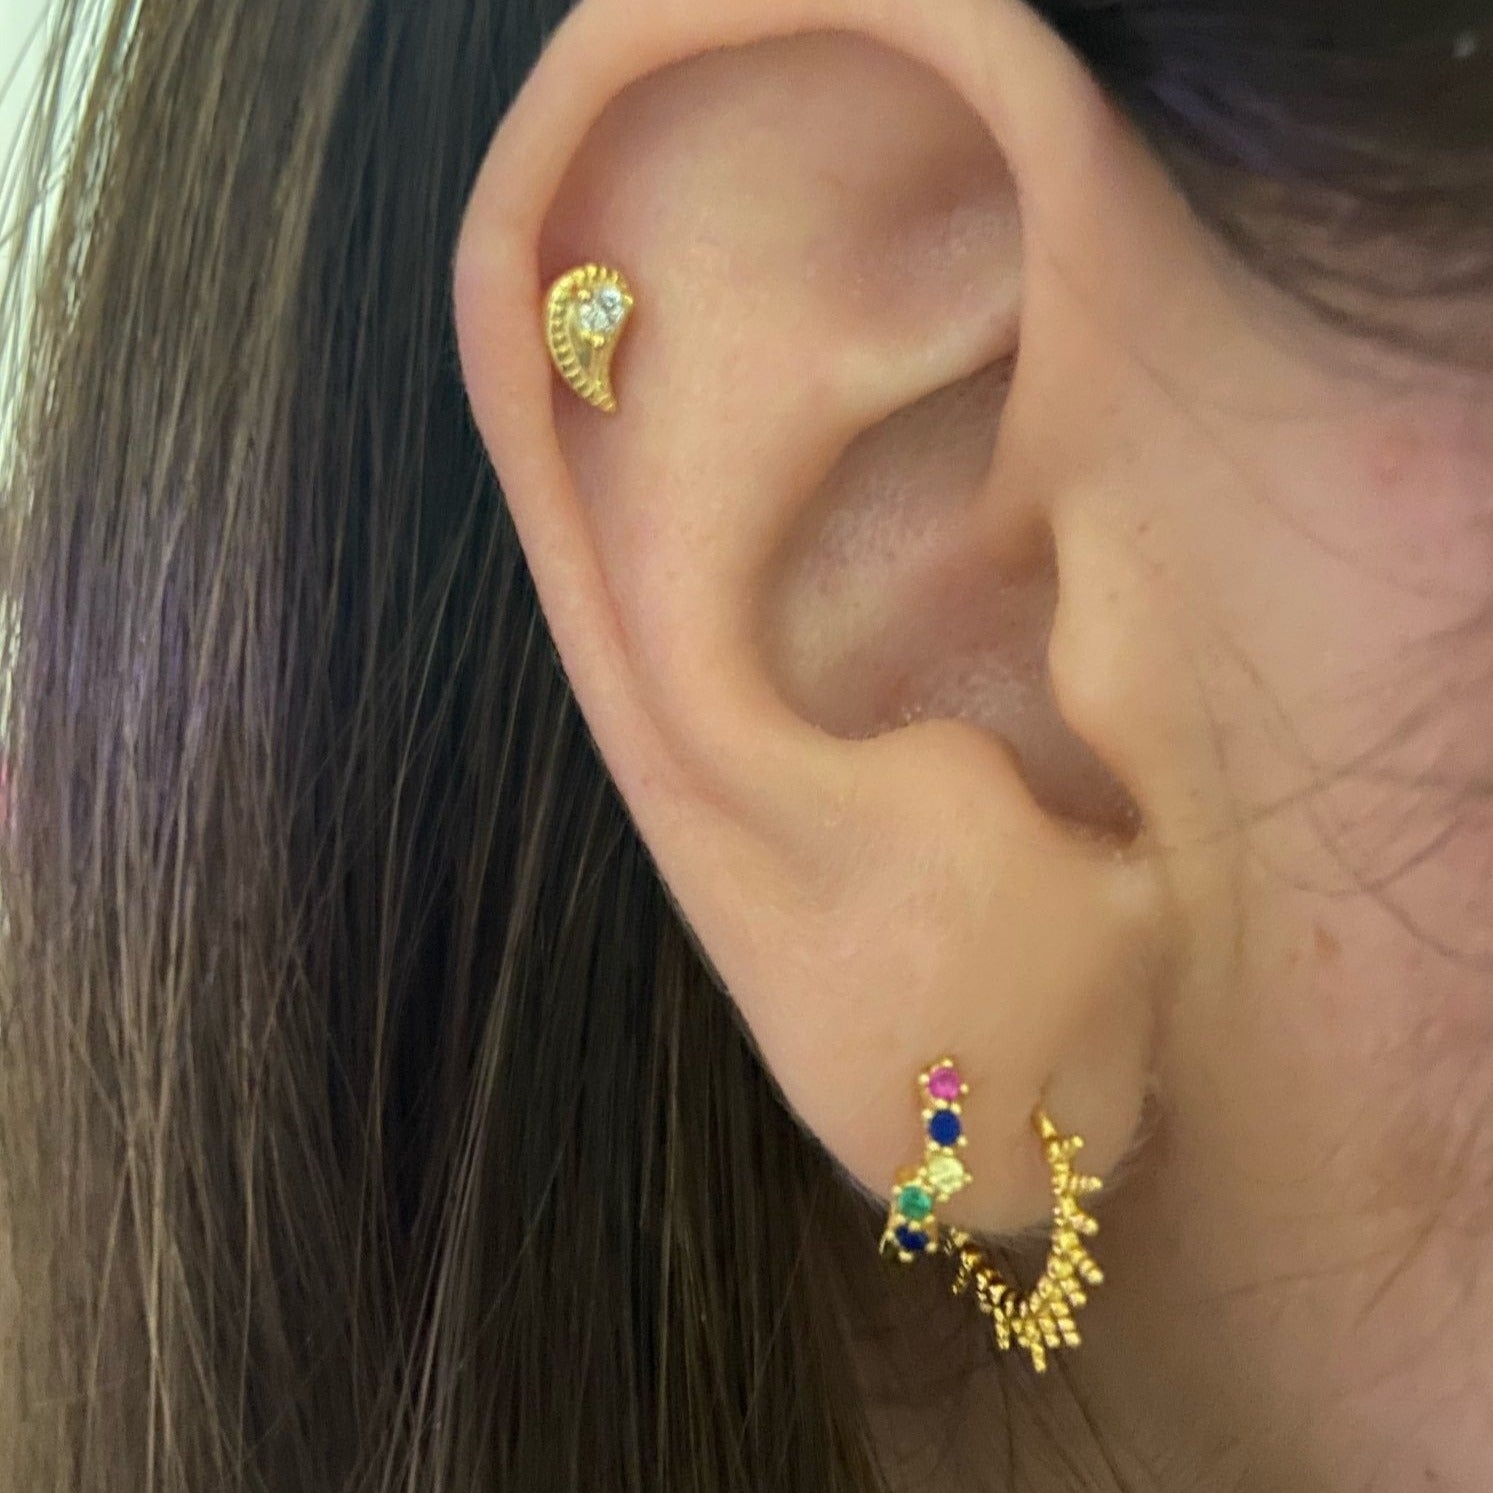 A model wearing the Paisley Cartilage Stud Earring.